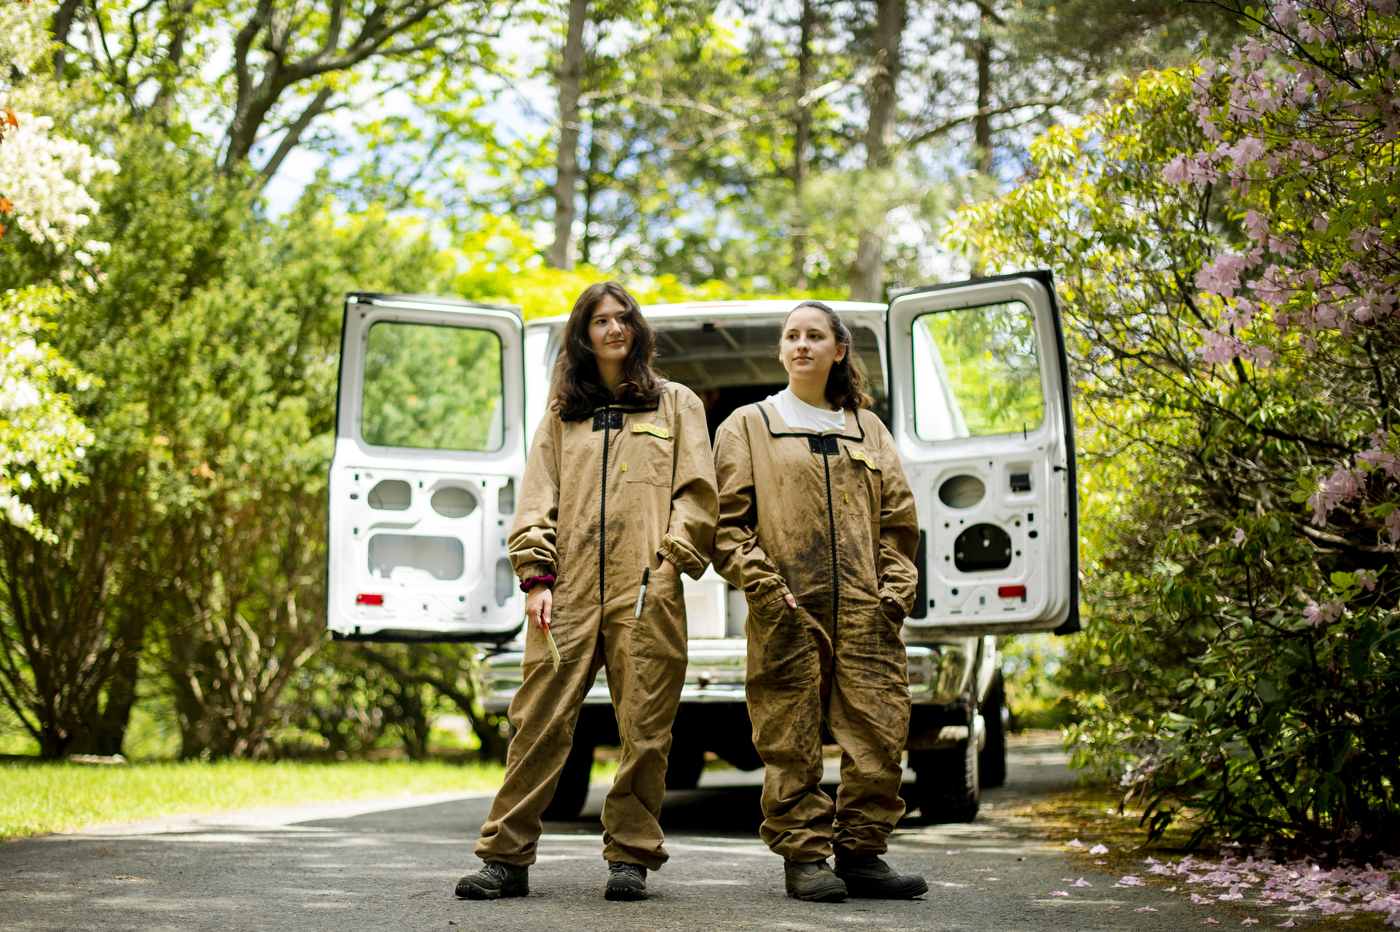 Two students in beekeeper suits in front of a van